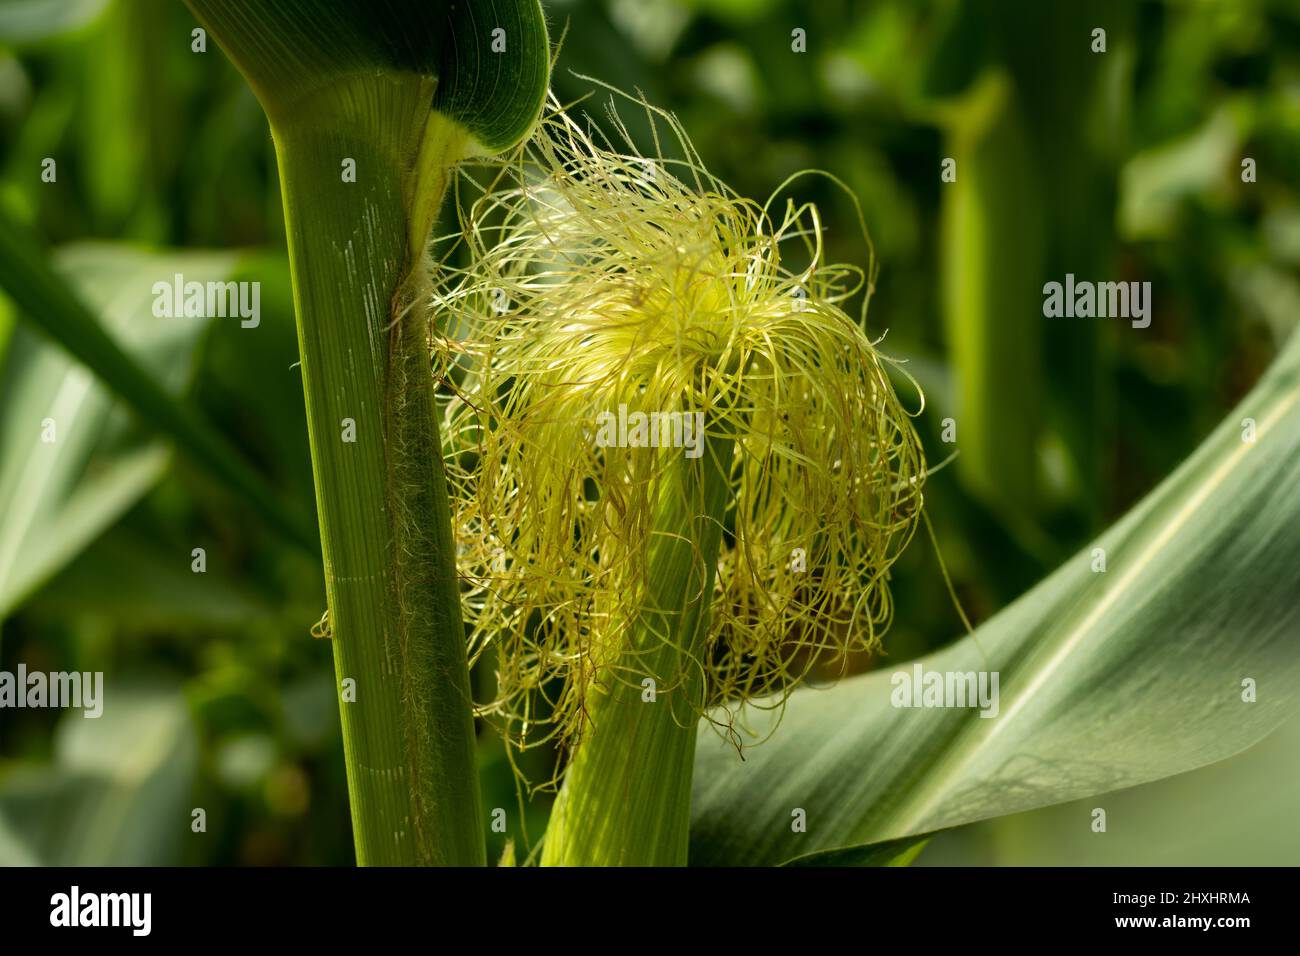 This is a green Maize flower. Maize Zea mays L. Maize is the most produced cereal crop in the world and the most adapted to different ecosystems. Stock Photo